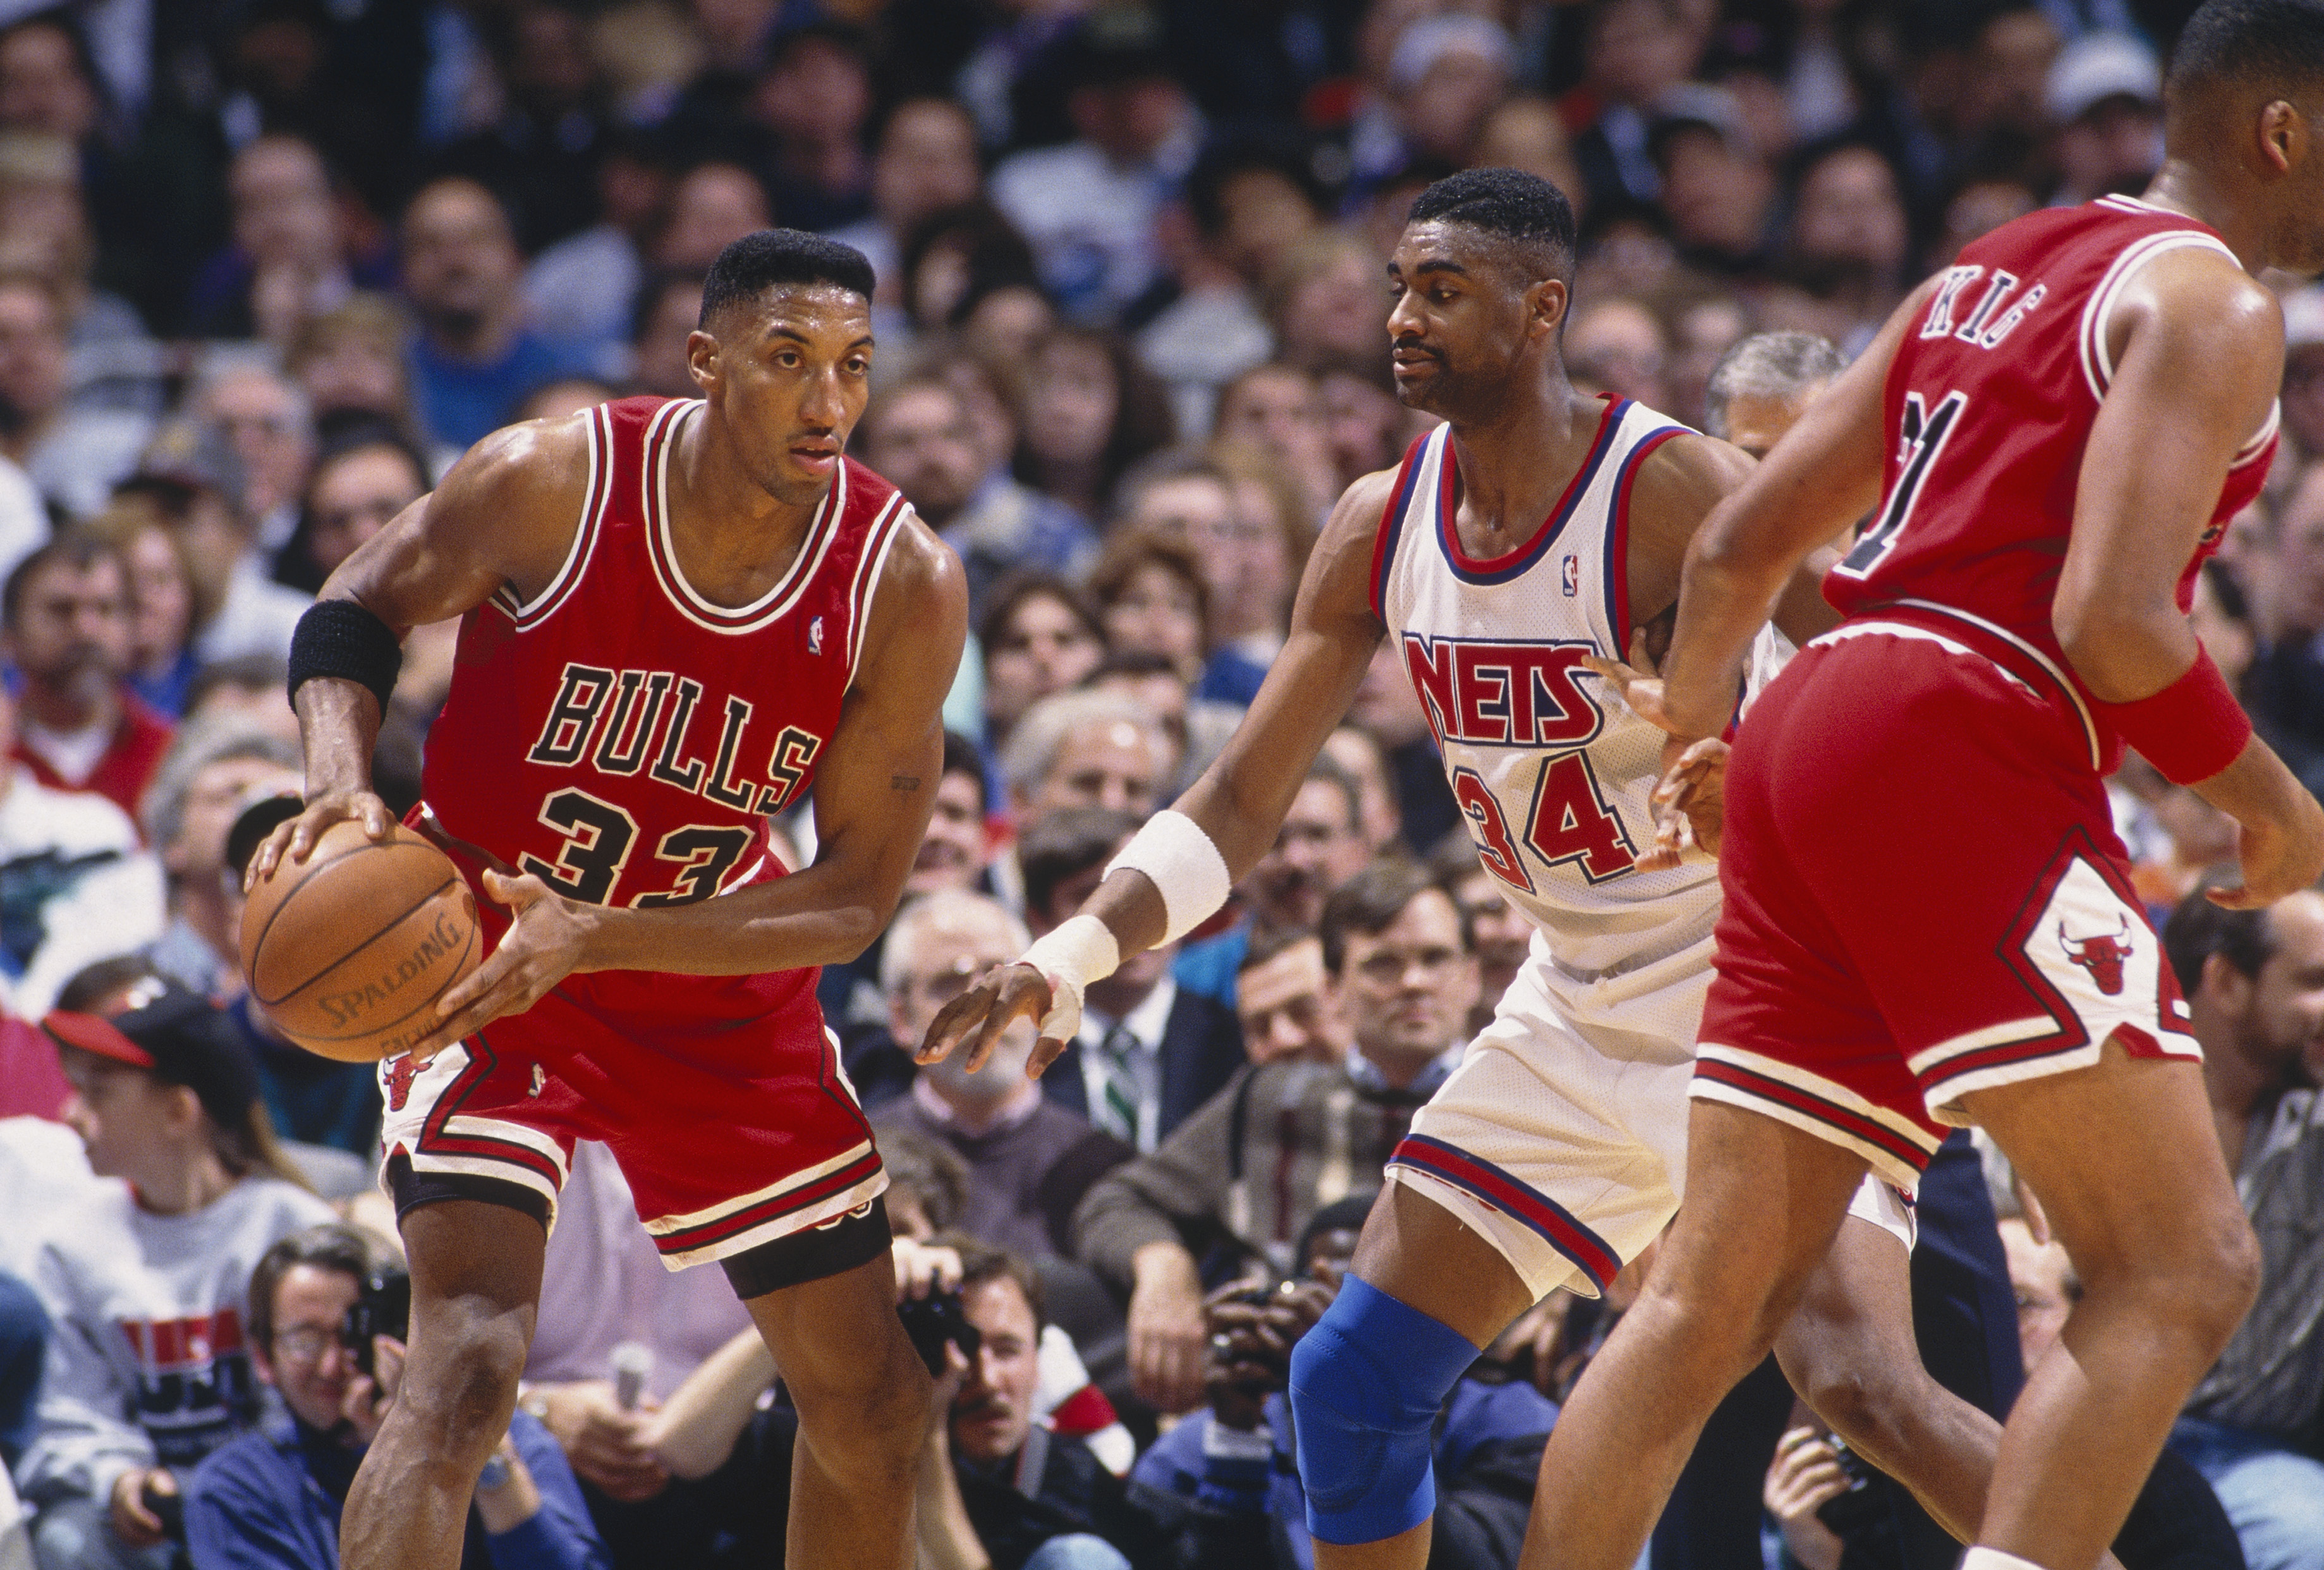 Chicago Bulls legend Scottie Pippen holds the ball during an NBA game in 1993